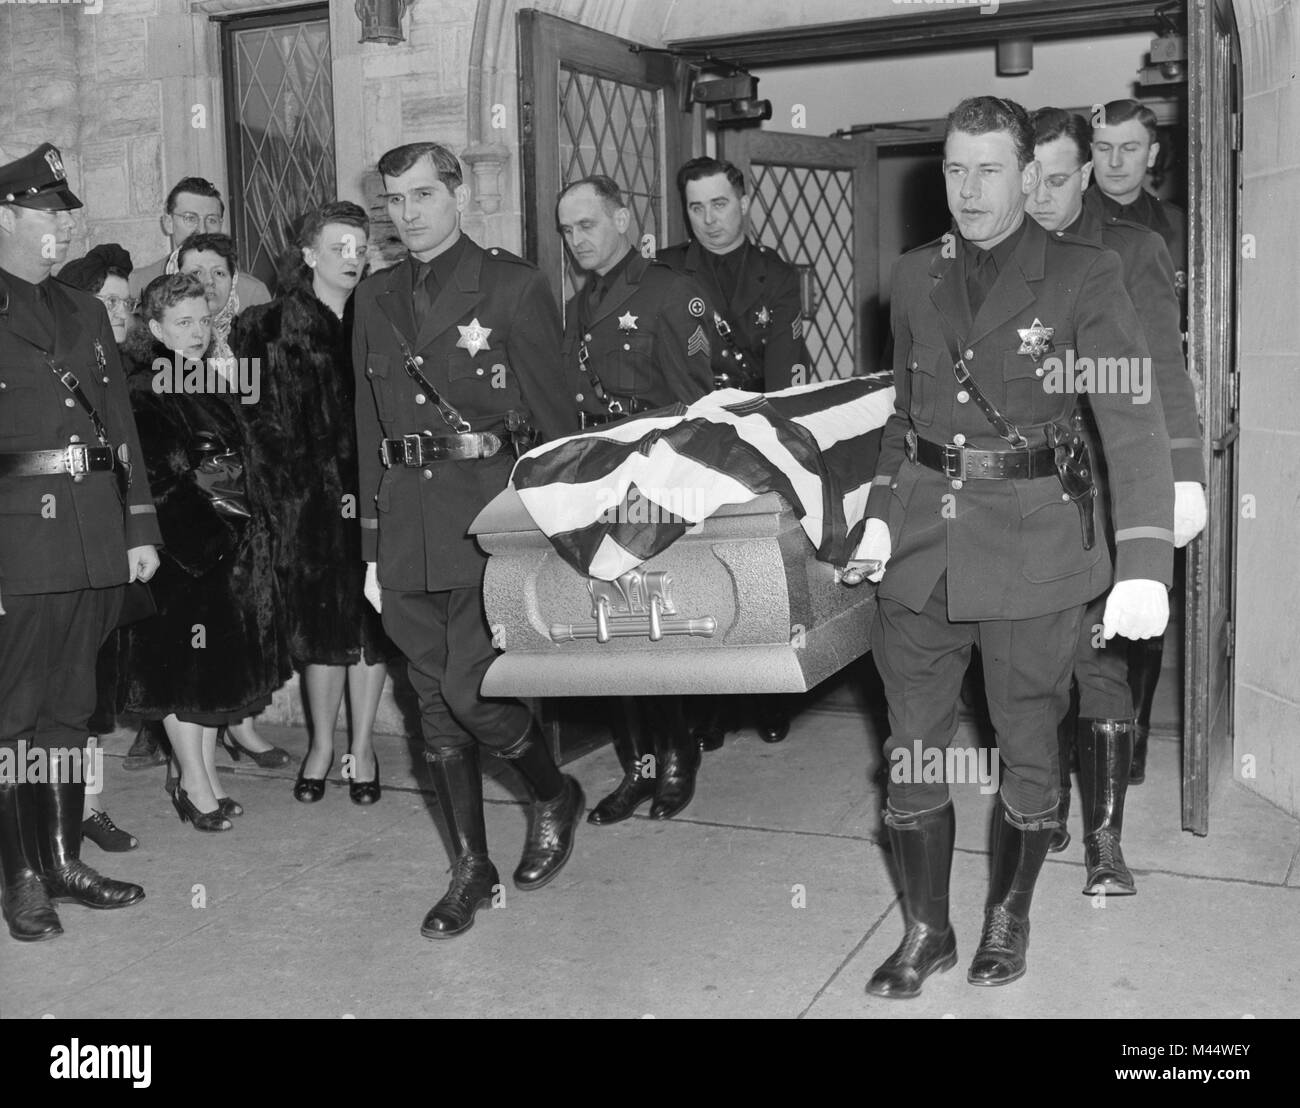 Fellow officers carry the casket of a fallen comrade in Chicago, ca. 1948. Stock Photo